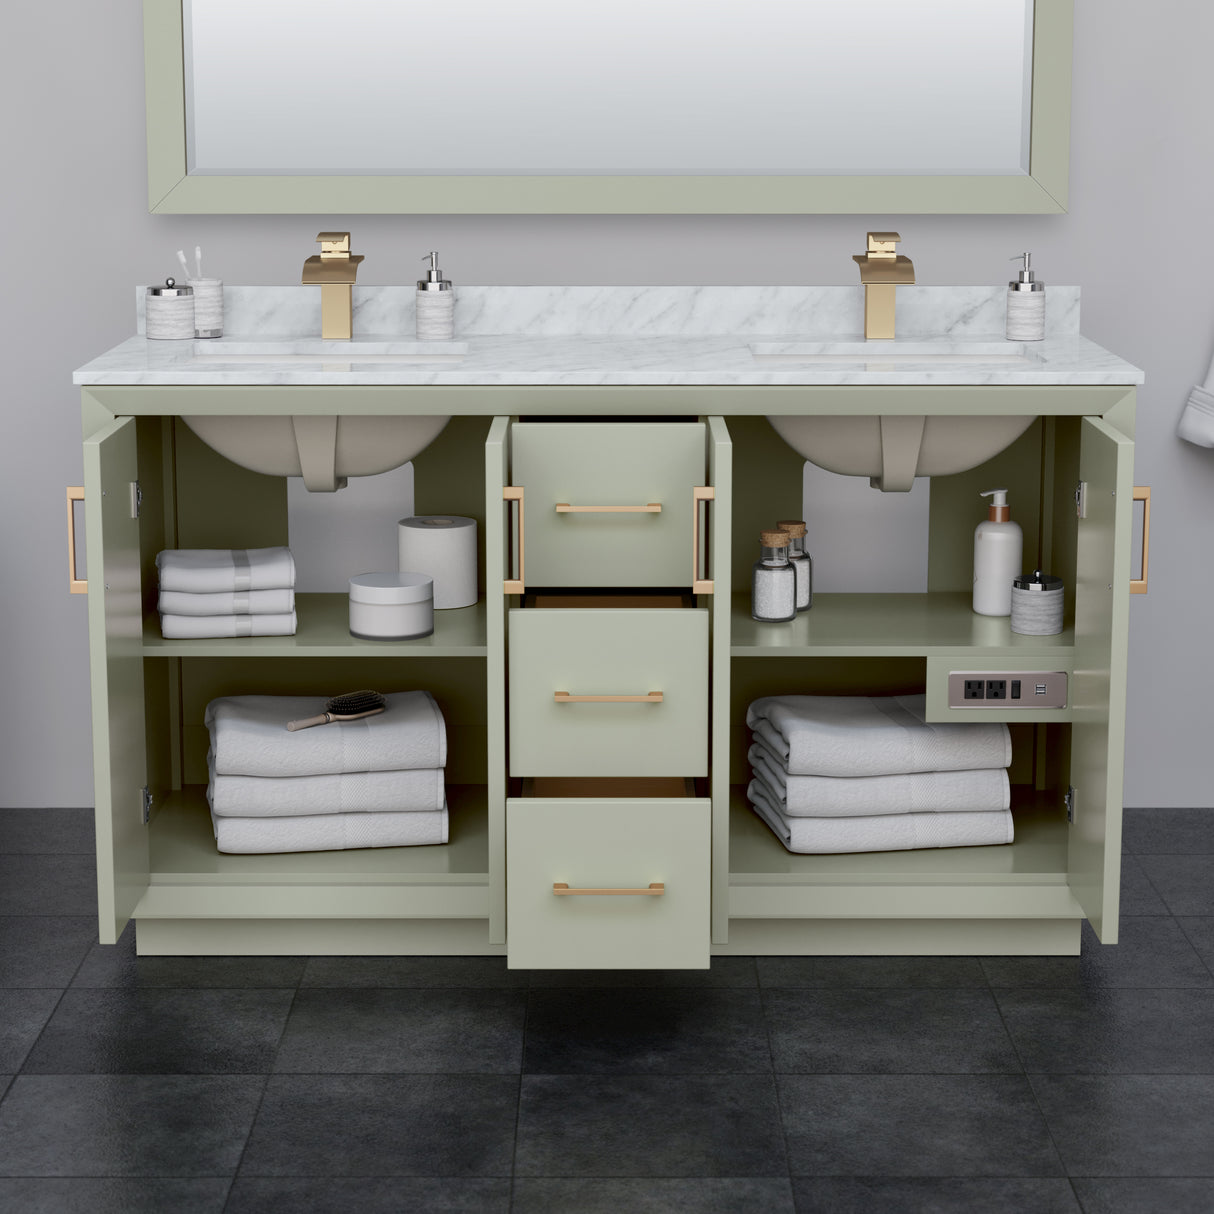 Strada 60 Inch Double Bathroom Vanity in Light Green White Cultured Marble Countertop Undermount Square Sinks Brushed Nickel Trim